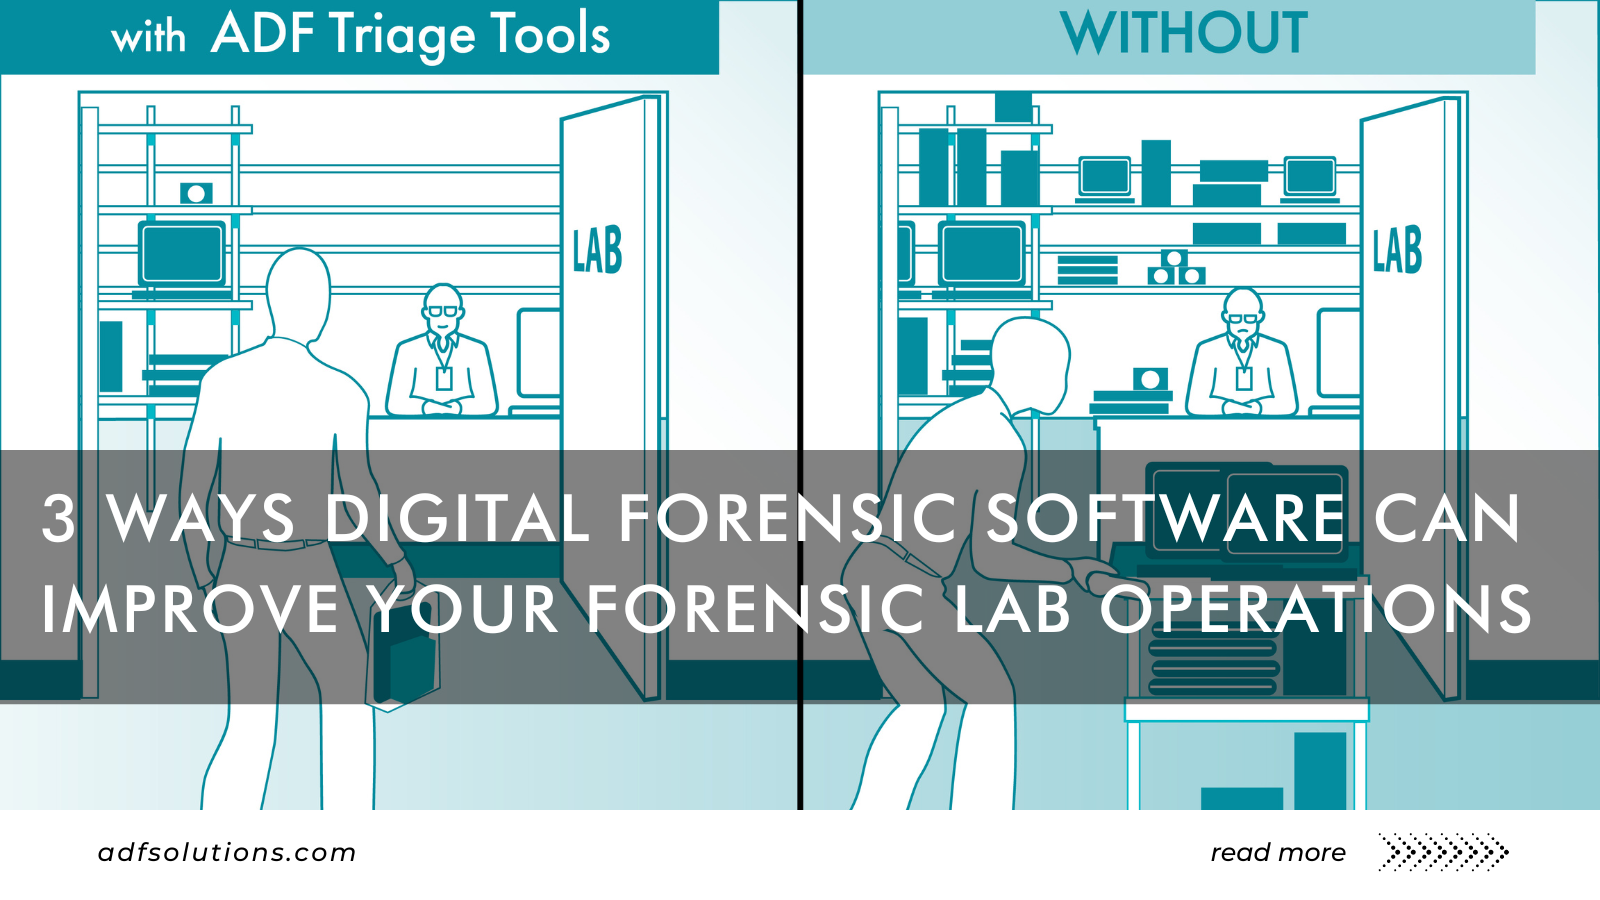 3 Ways Digital Forensic Software Can Improve Forensic Lab Operations